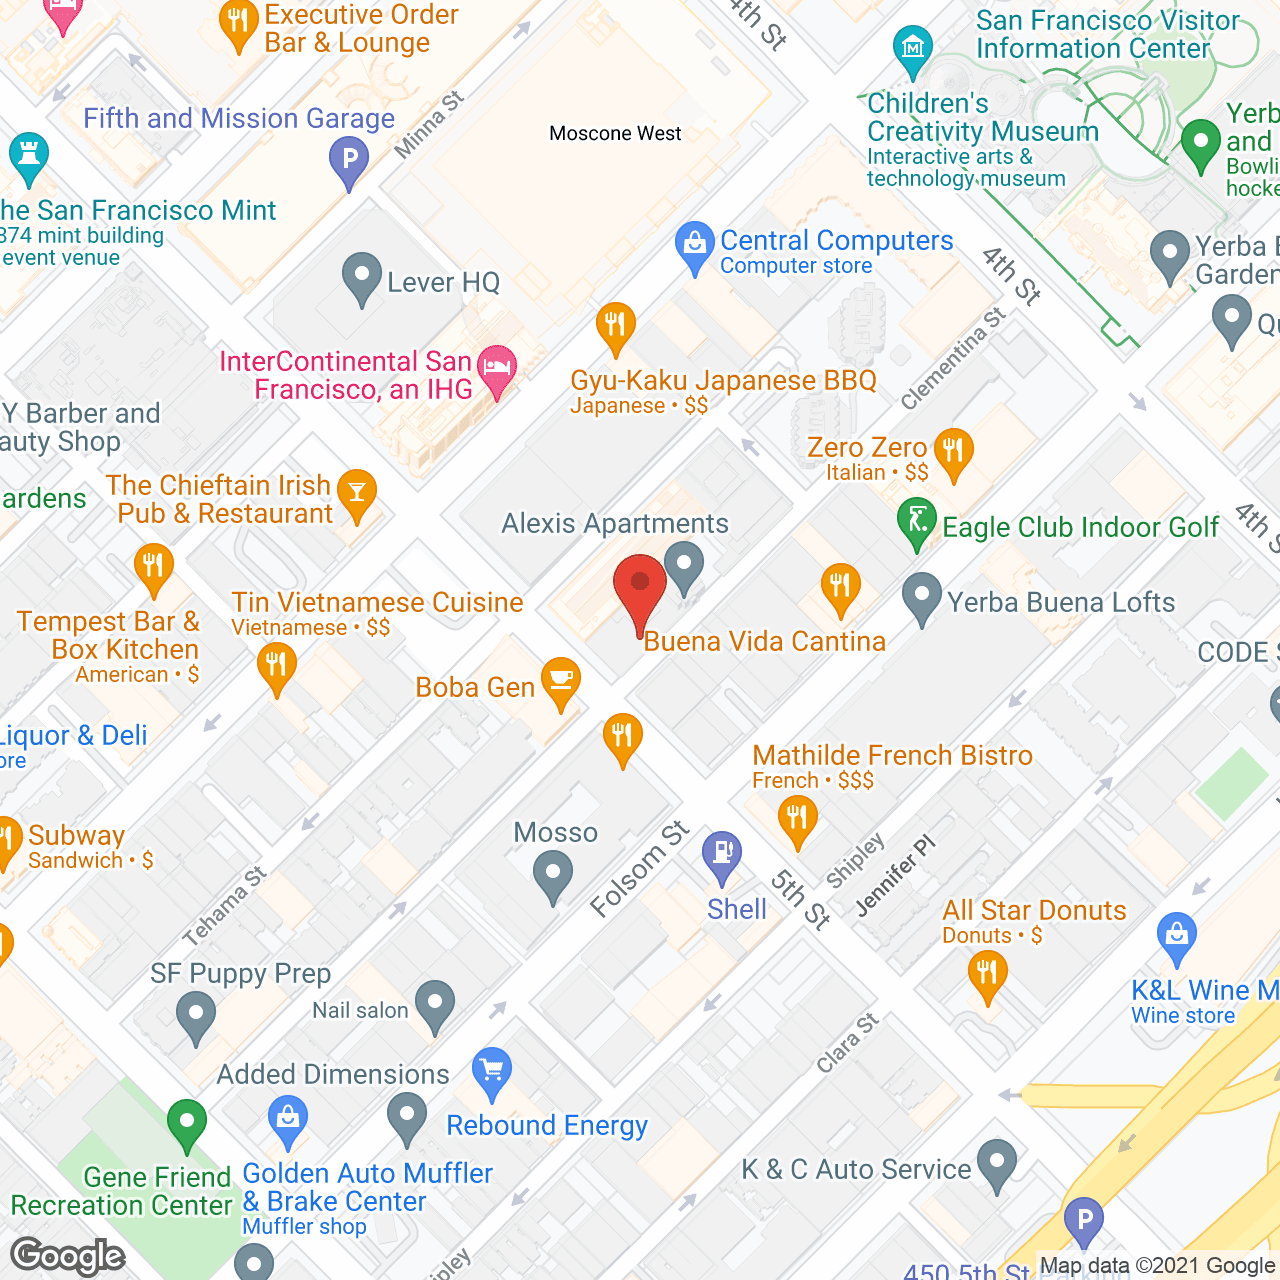 Alexis Apartments in google map